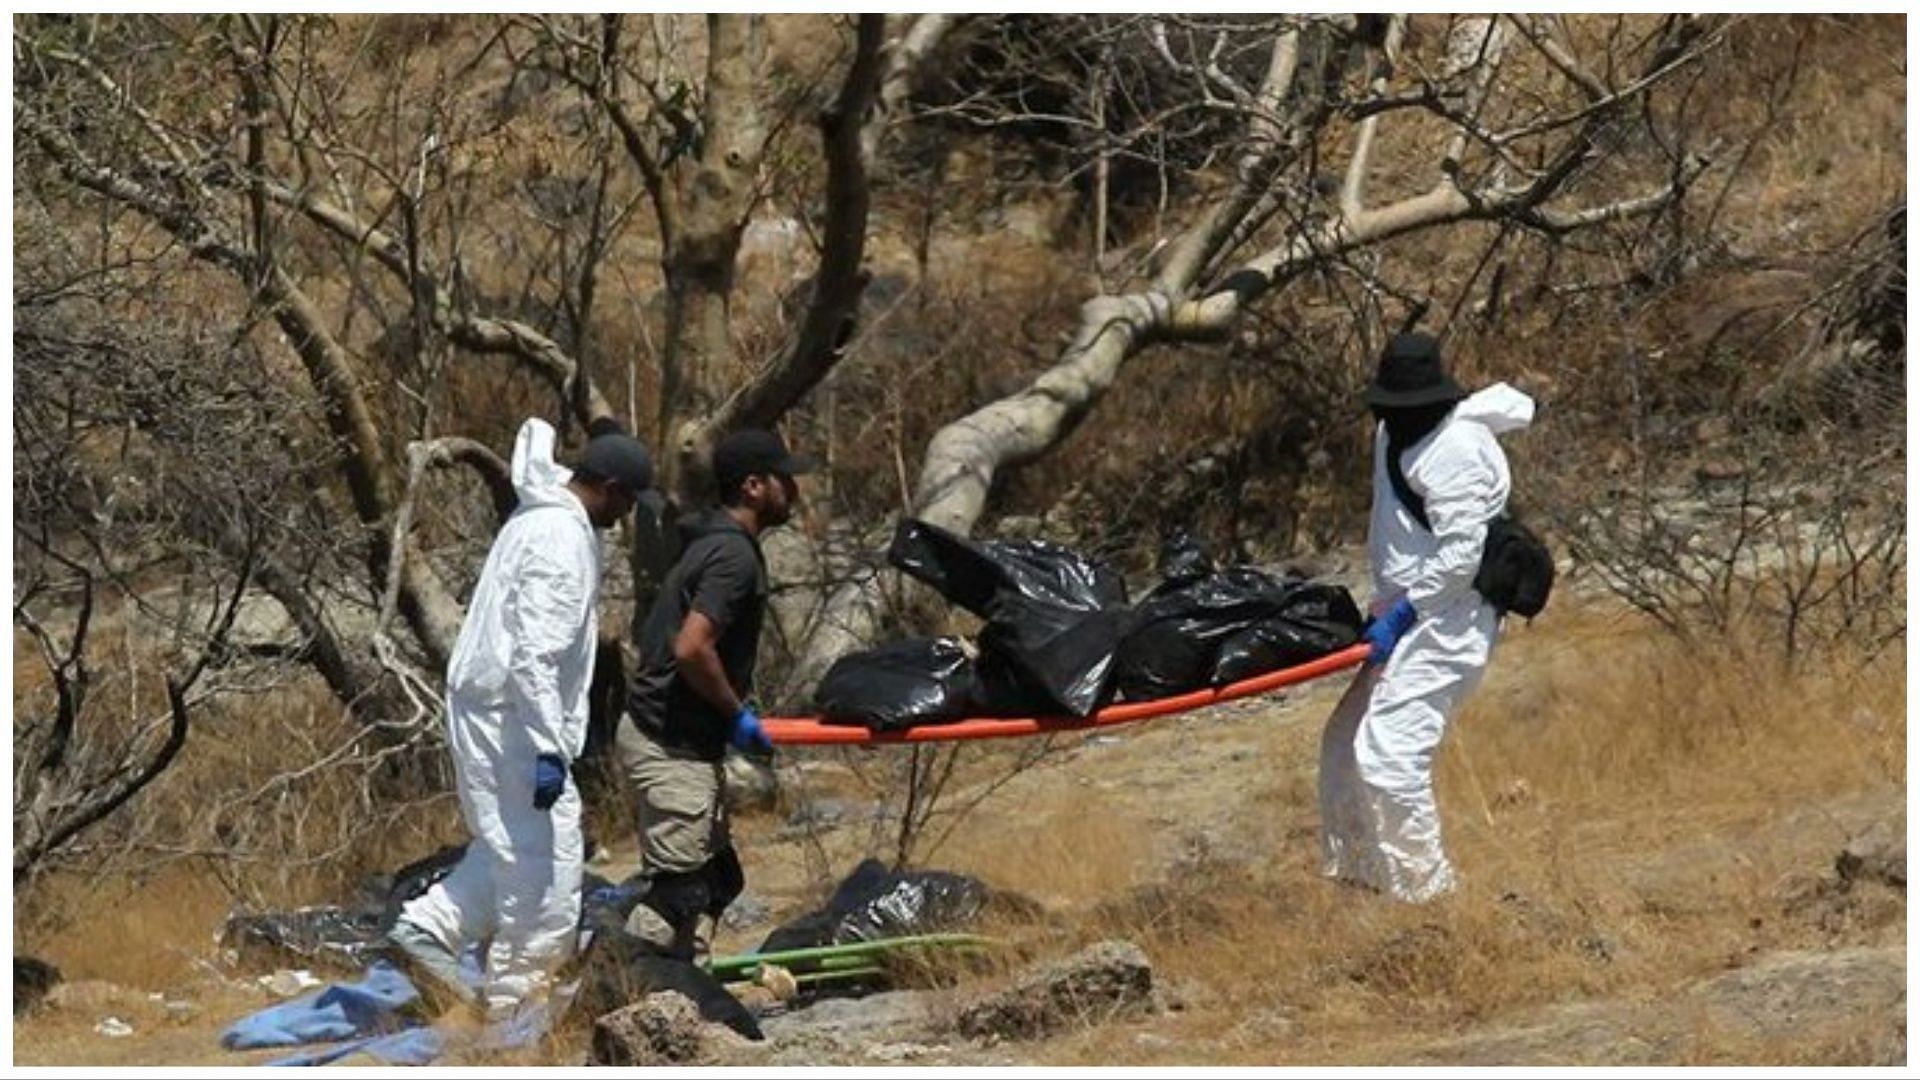 Several trash bags containing human remains have been found in Mexico, (Image via VINstGATOR 🇺🇸🇺🇸/Twitter)